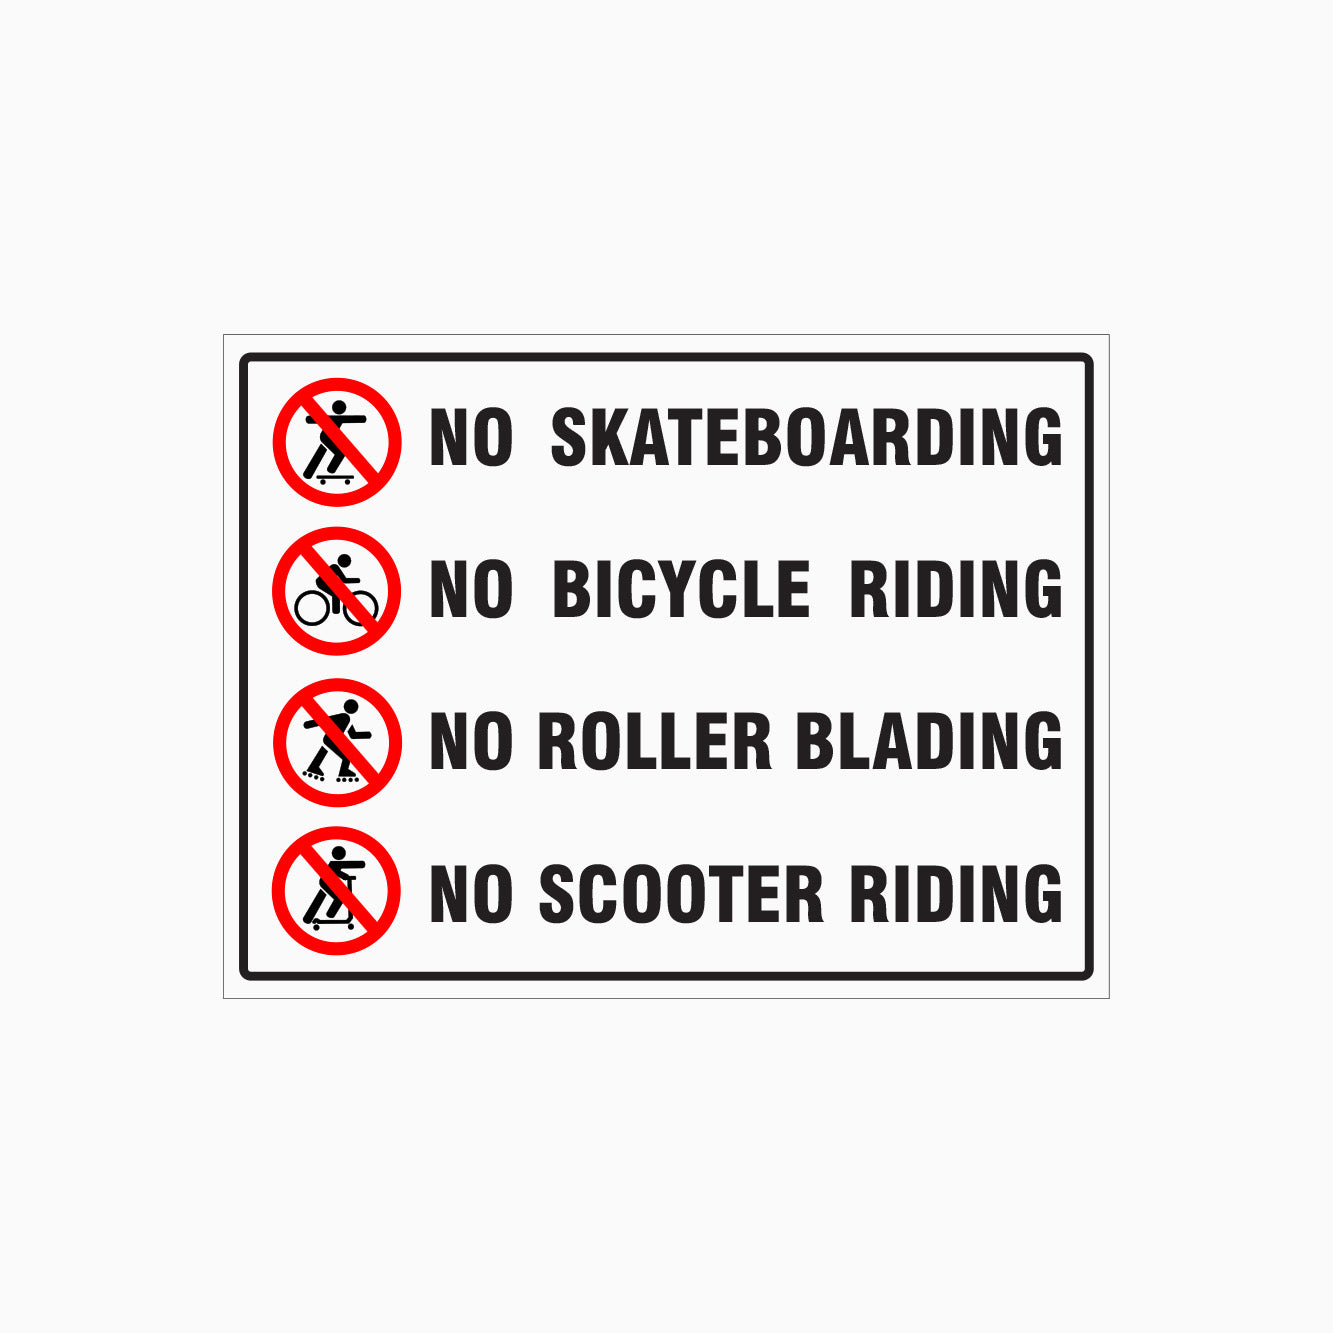 NO SKATEBOARDING, NO BICYCLE RIDING, NO ROLLER BLADING, NO SCOOTER RIDING SIGN - GET SIGNS